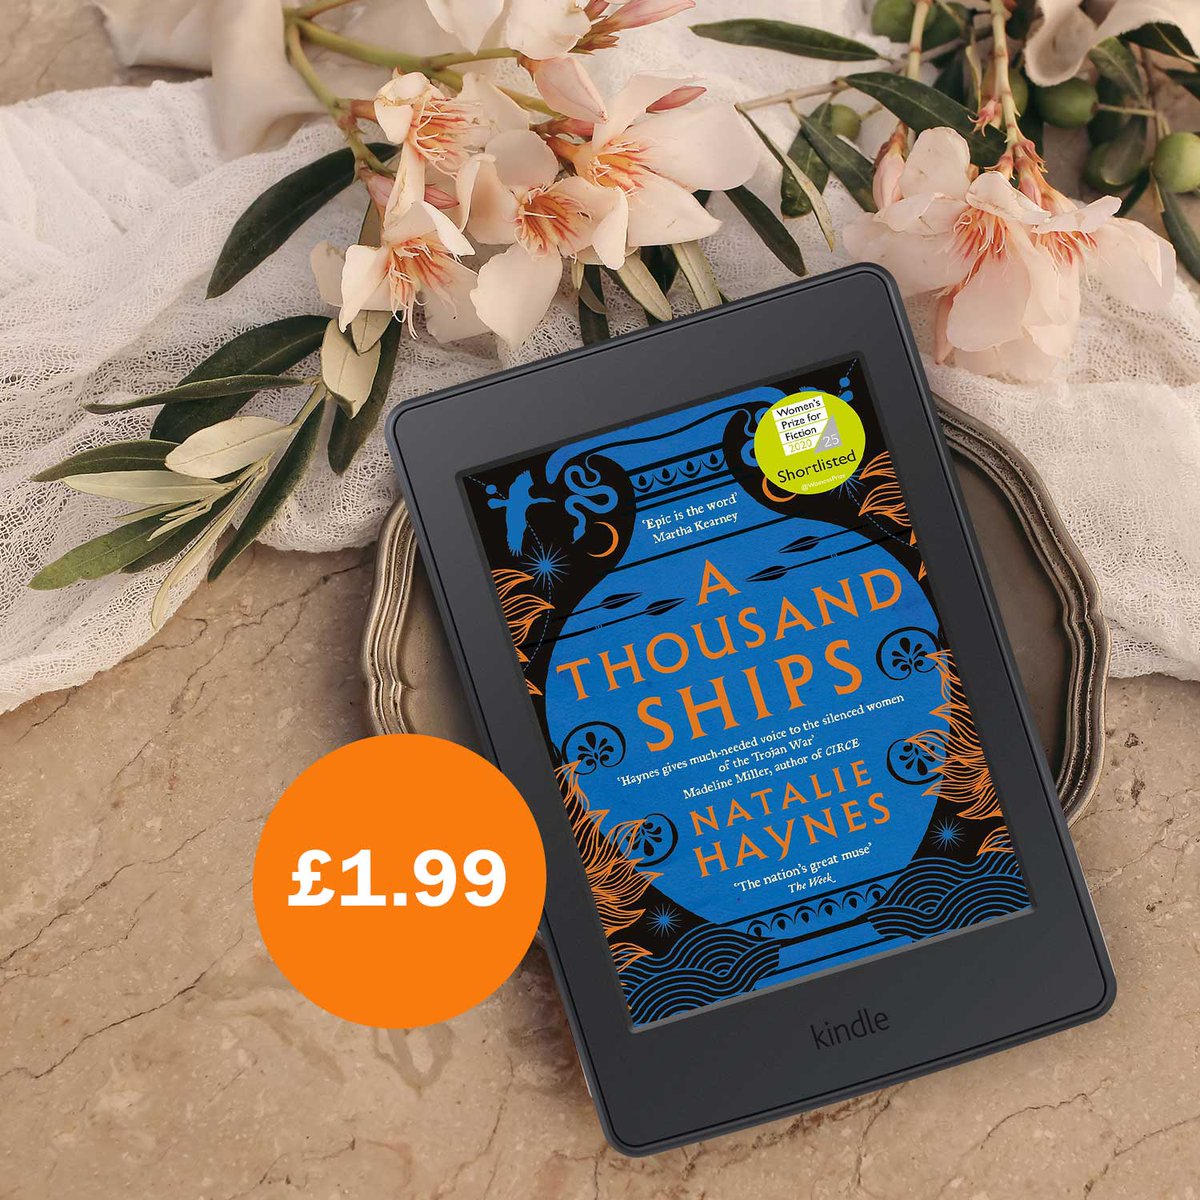 Shortlisted for the Women's Prize for Fiction, A Thousand Ships by @officialnhaynes is just £1.99 on Kindle until the end of May! Discover this powerful feminist retelling of the Trojan war from 'the nation's great muse' here: t.ly/-VD5H